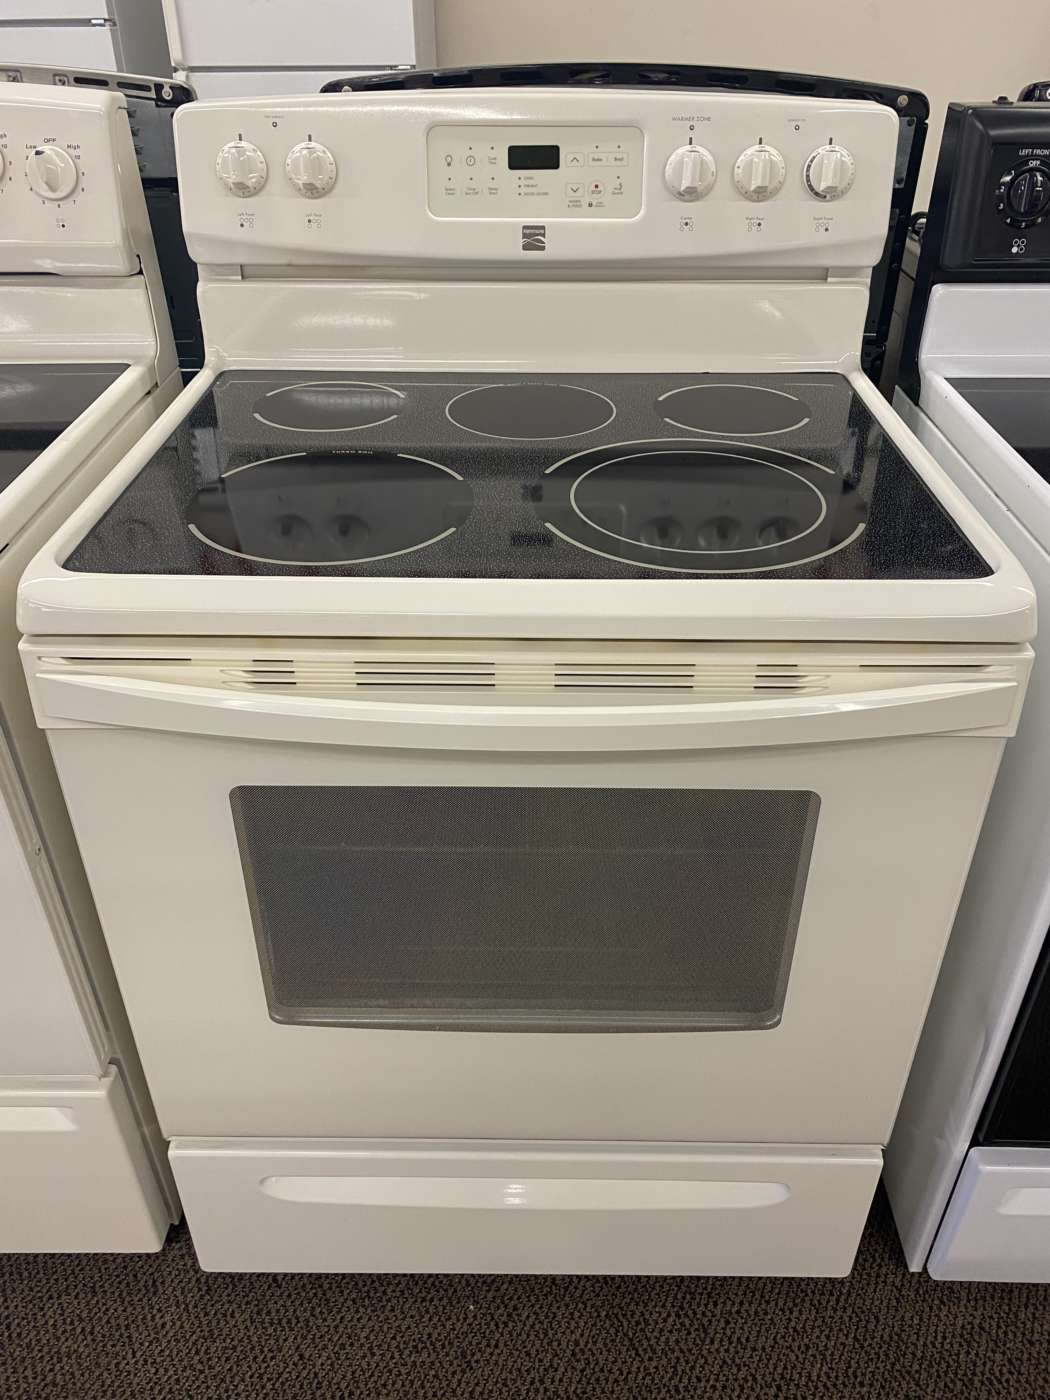 Reconditioned KENMORE Self-Clean Electric Range – Bisque